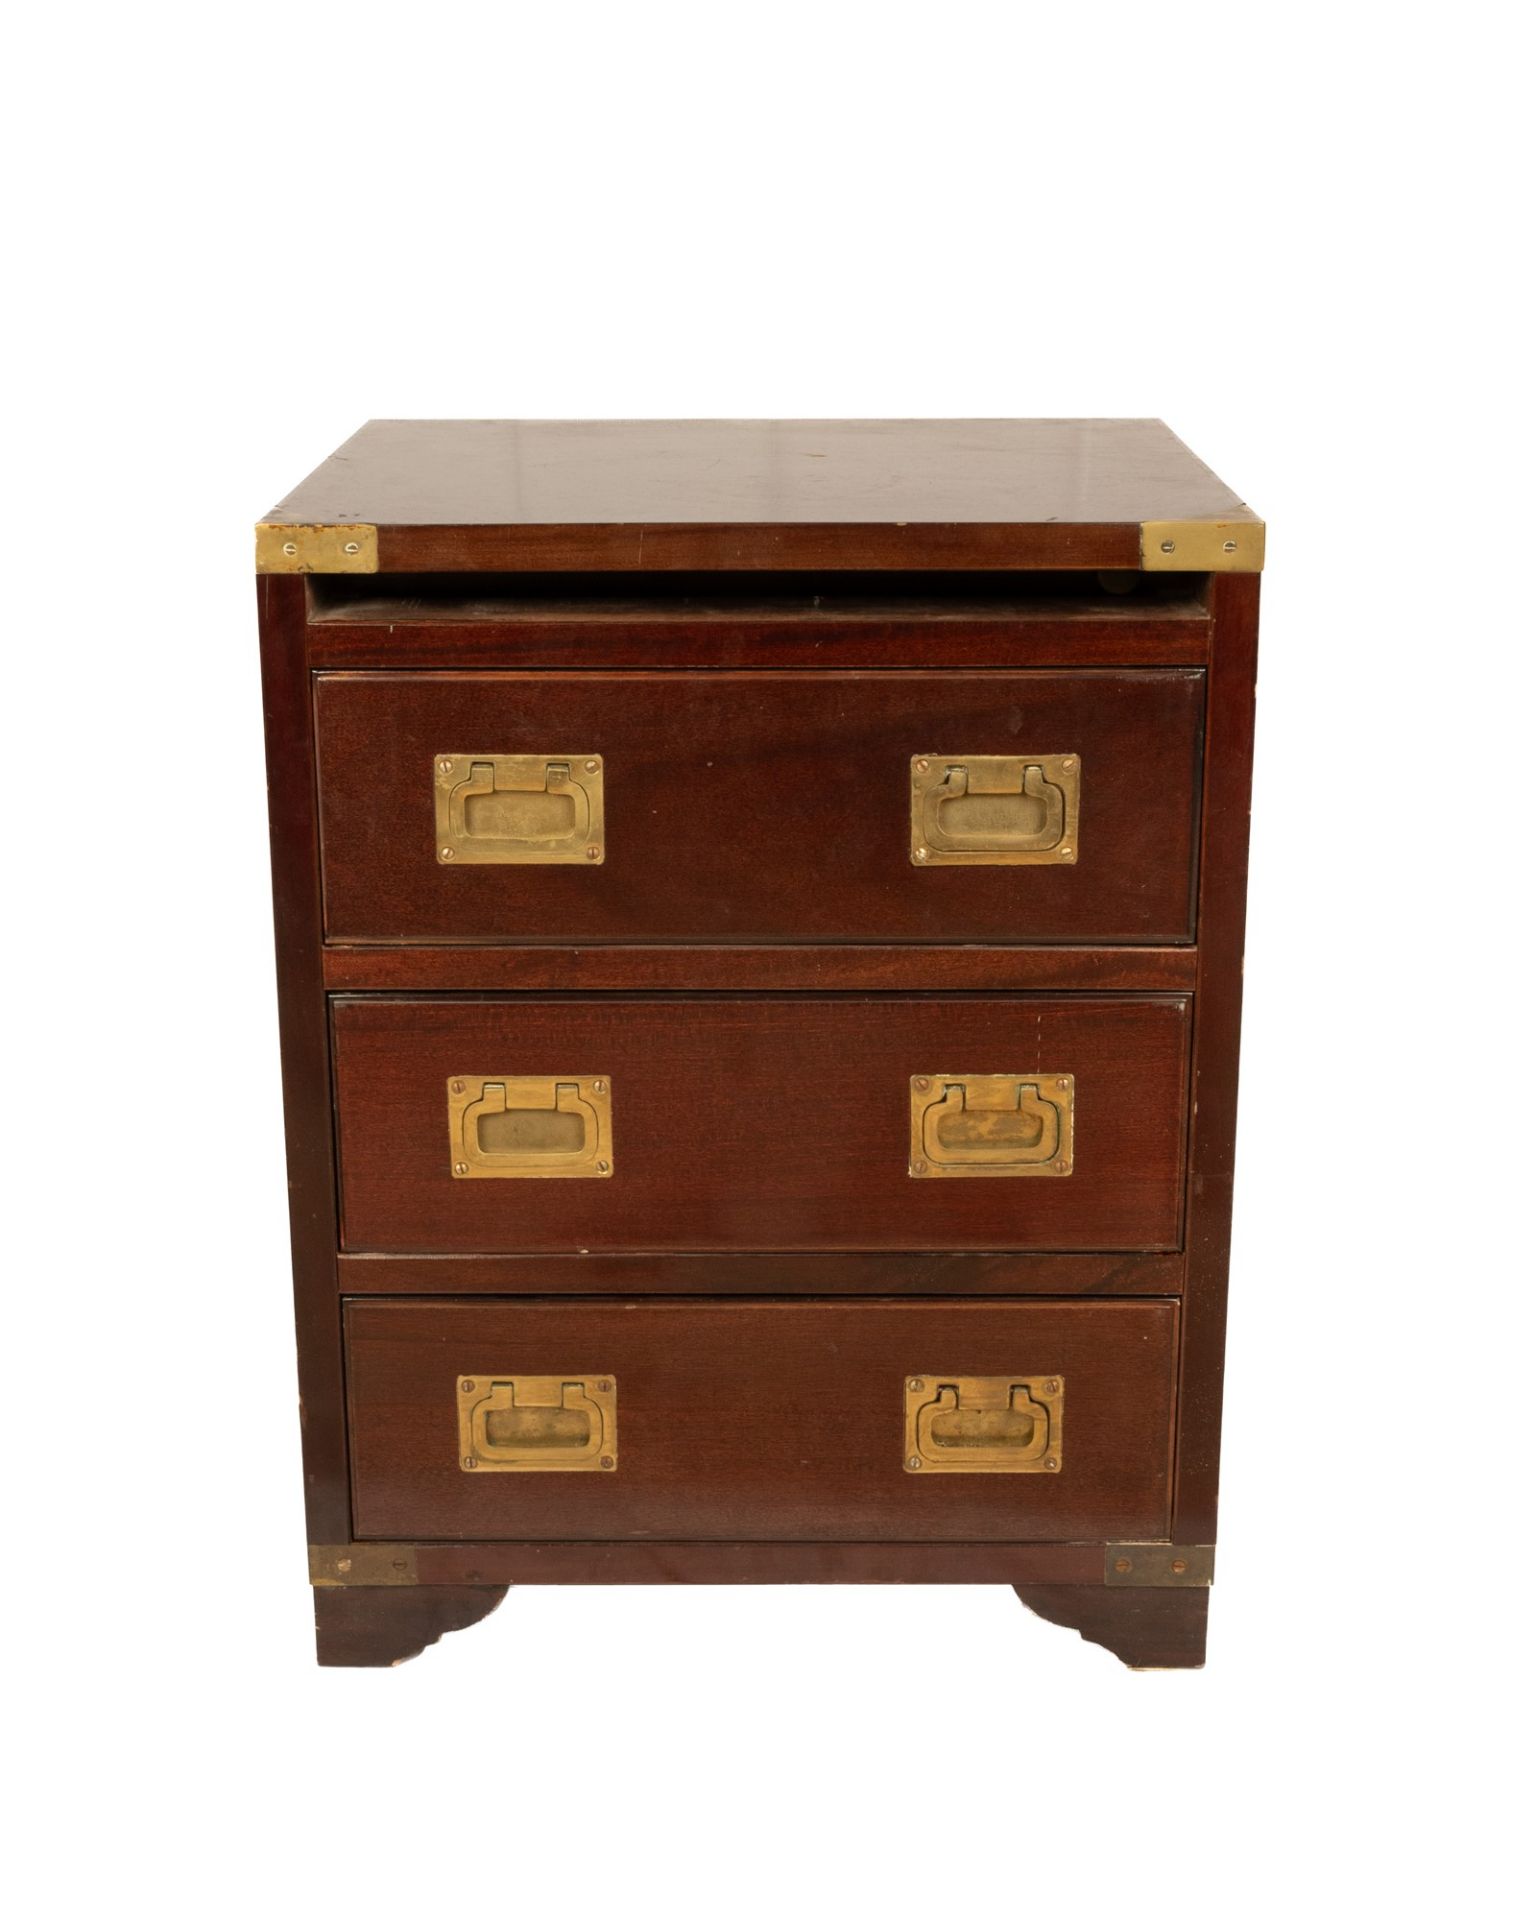 Antica Marina wooden bedside table with brass inserts - Image 15 of 23